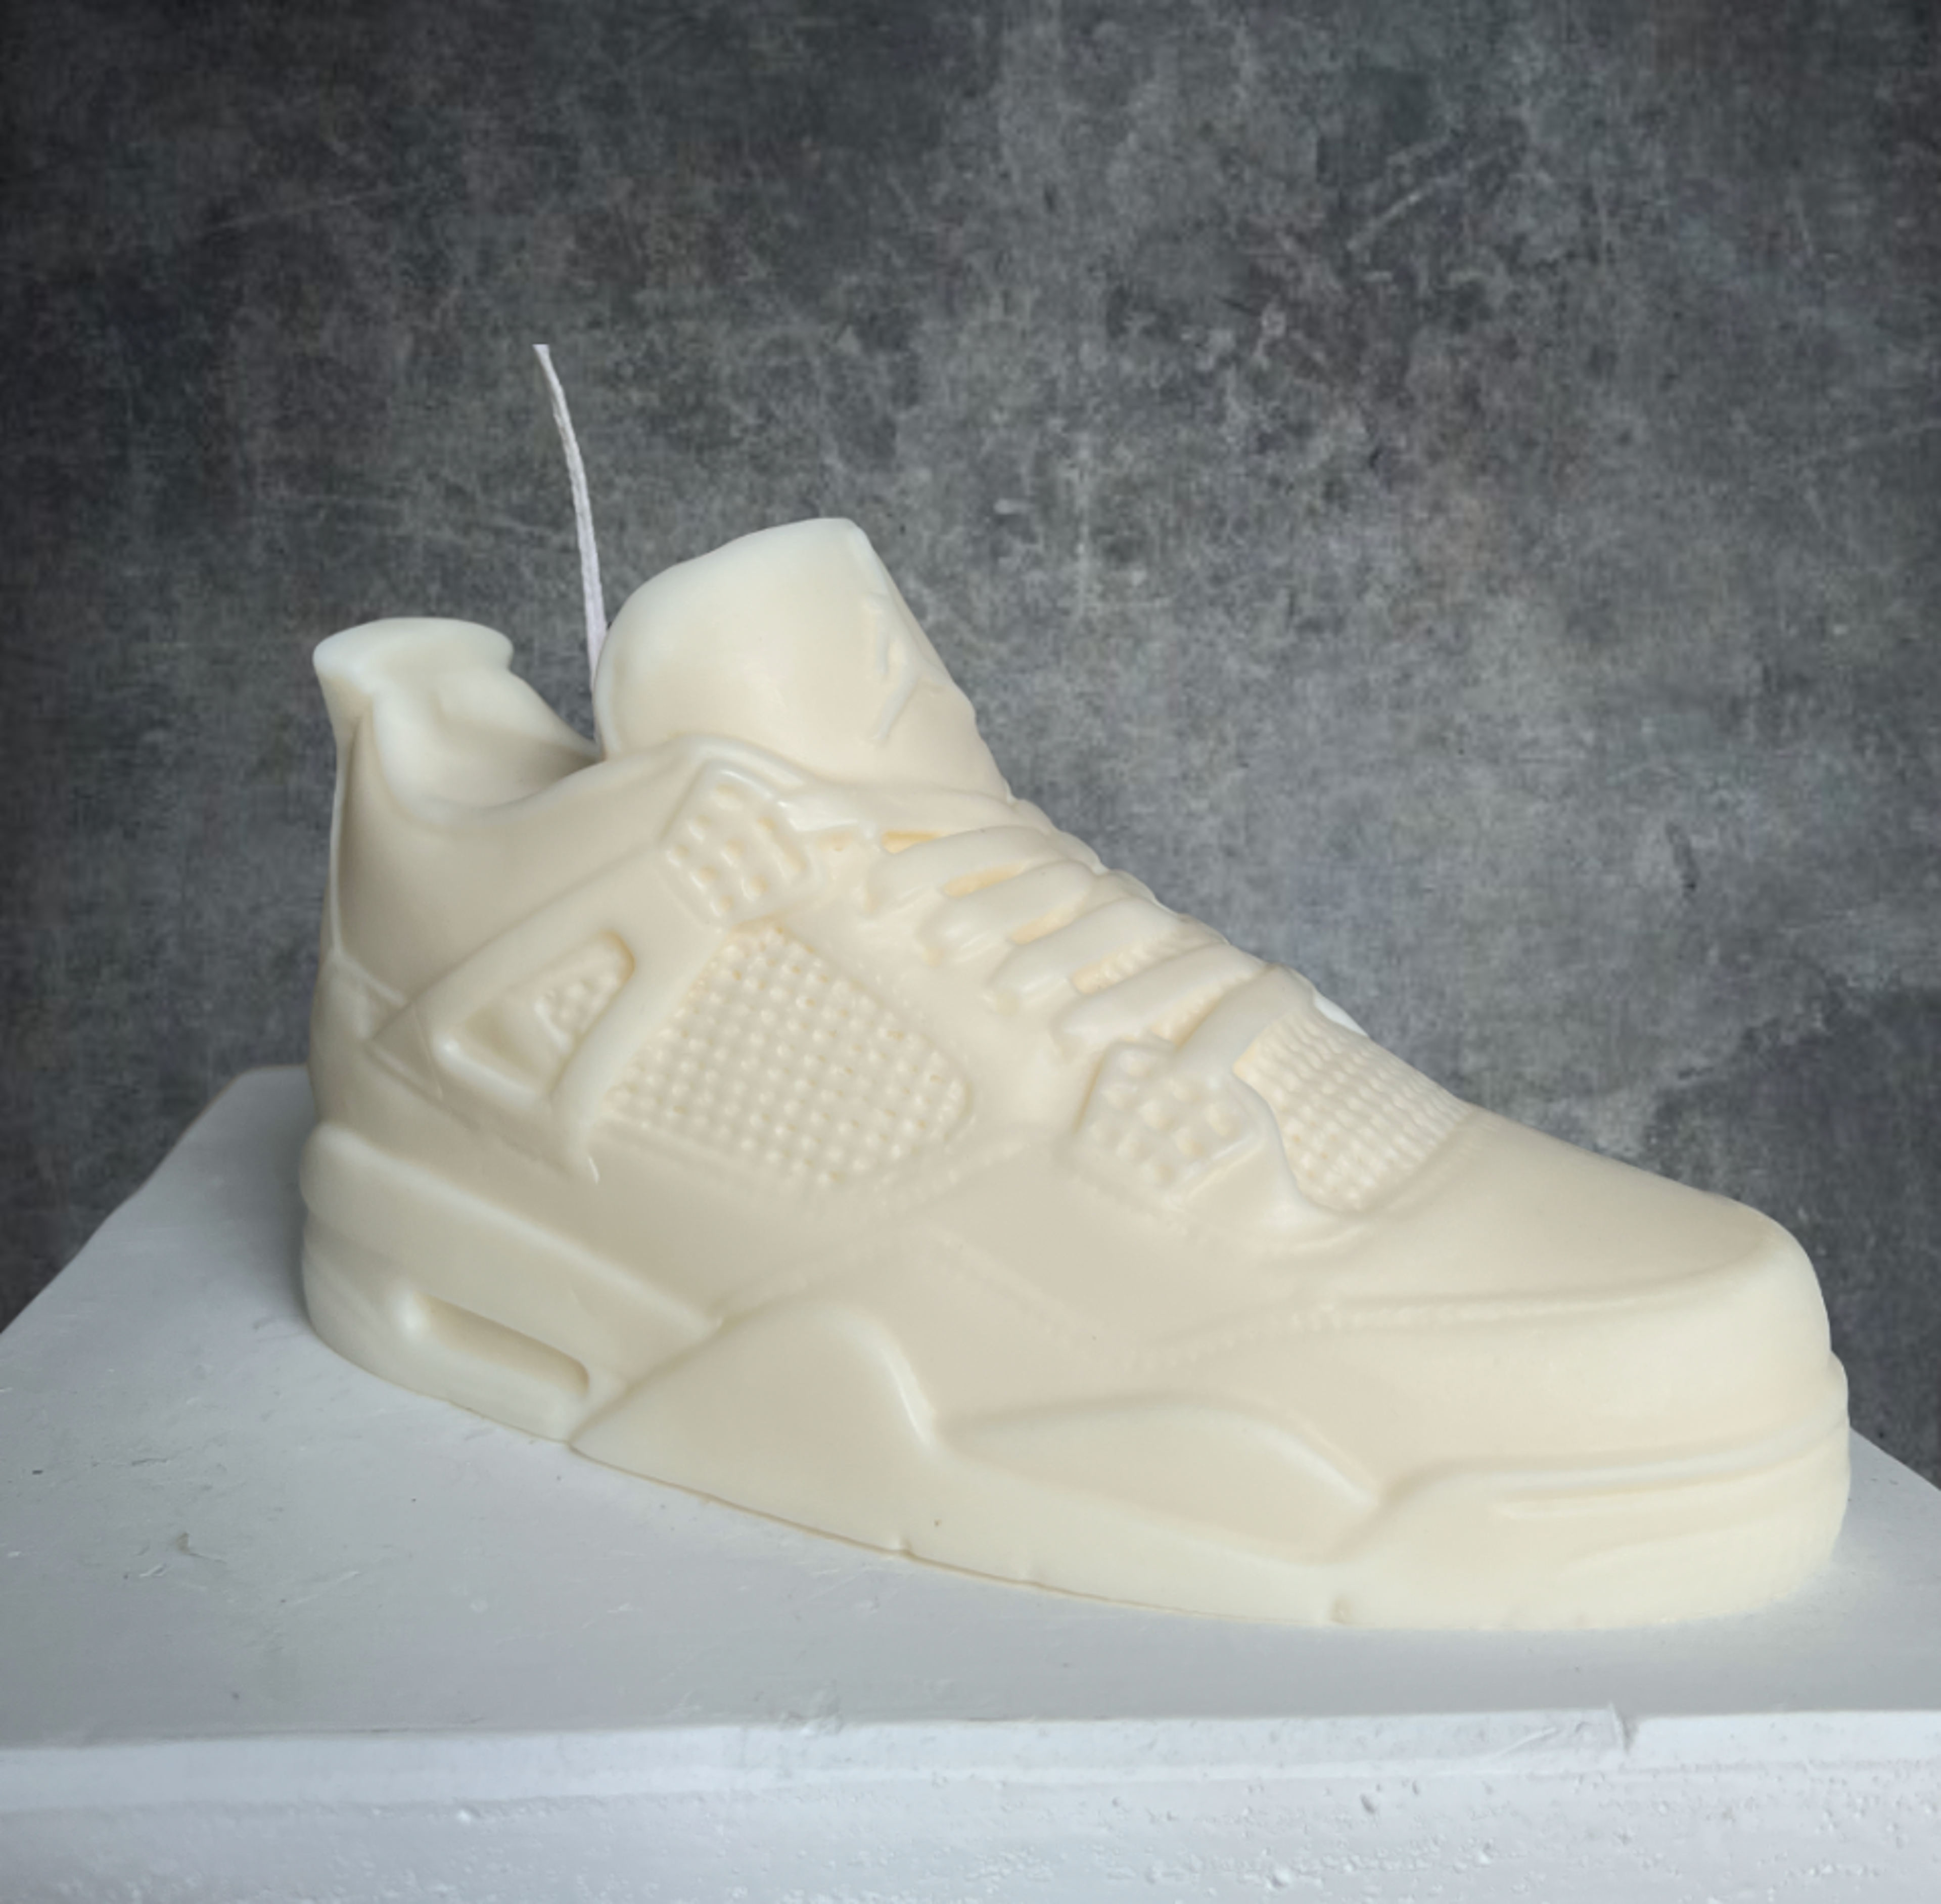 AJ 4 Inspired Candle